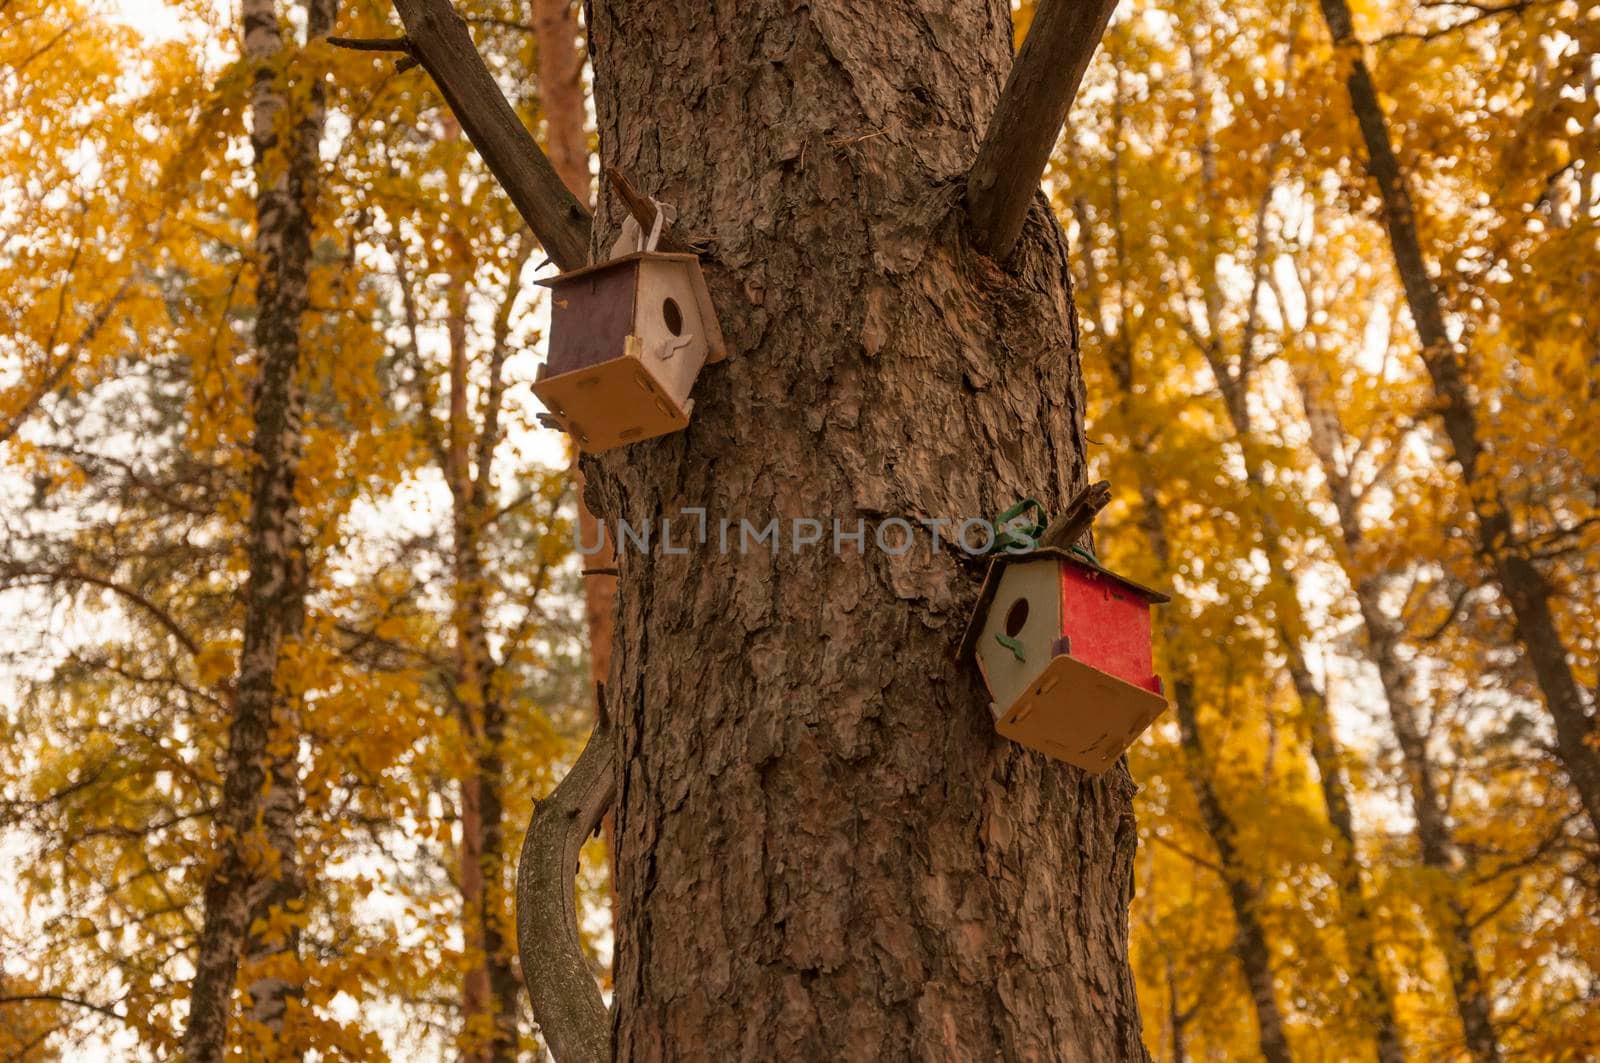 Feeders for birds in the autumn park